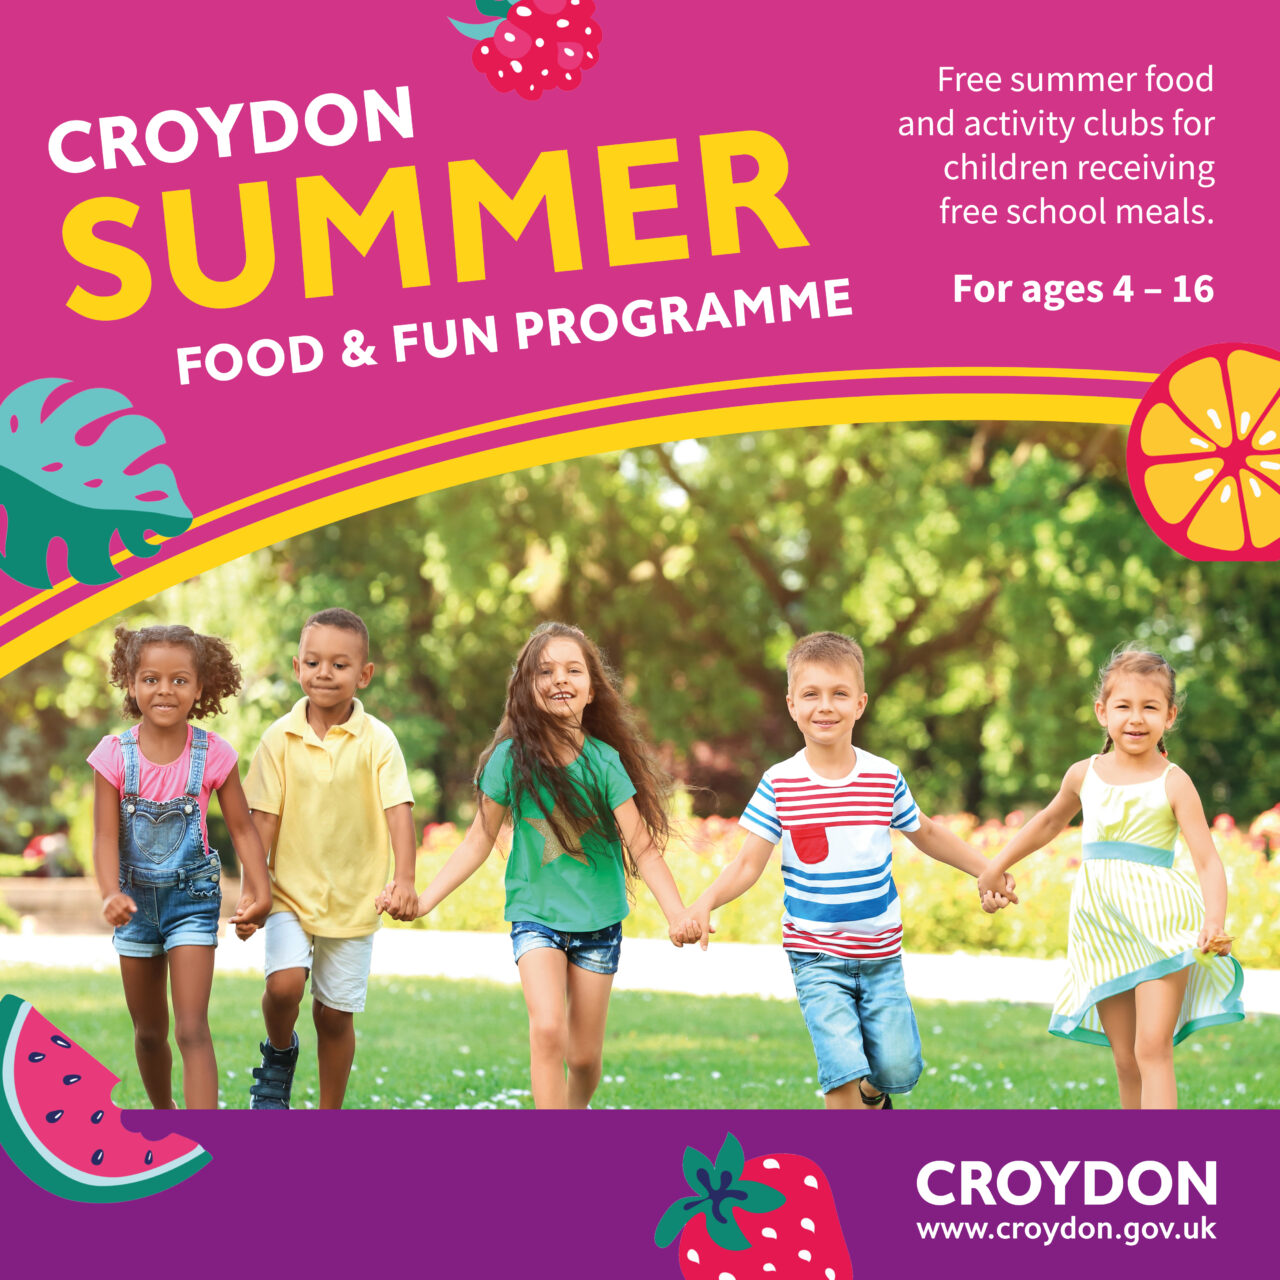 Summer food and fun programme image which shows a group of school children running in a park